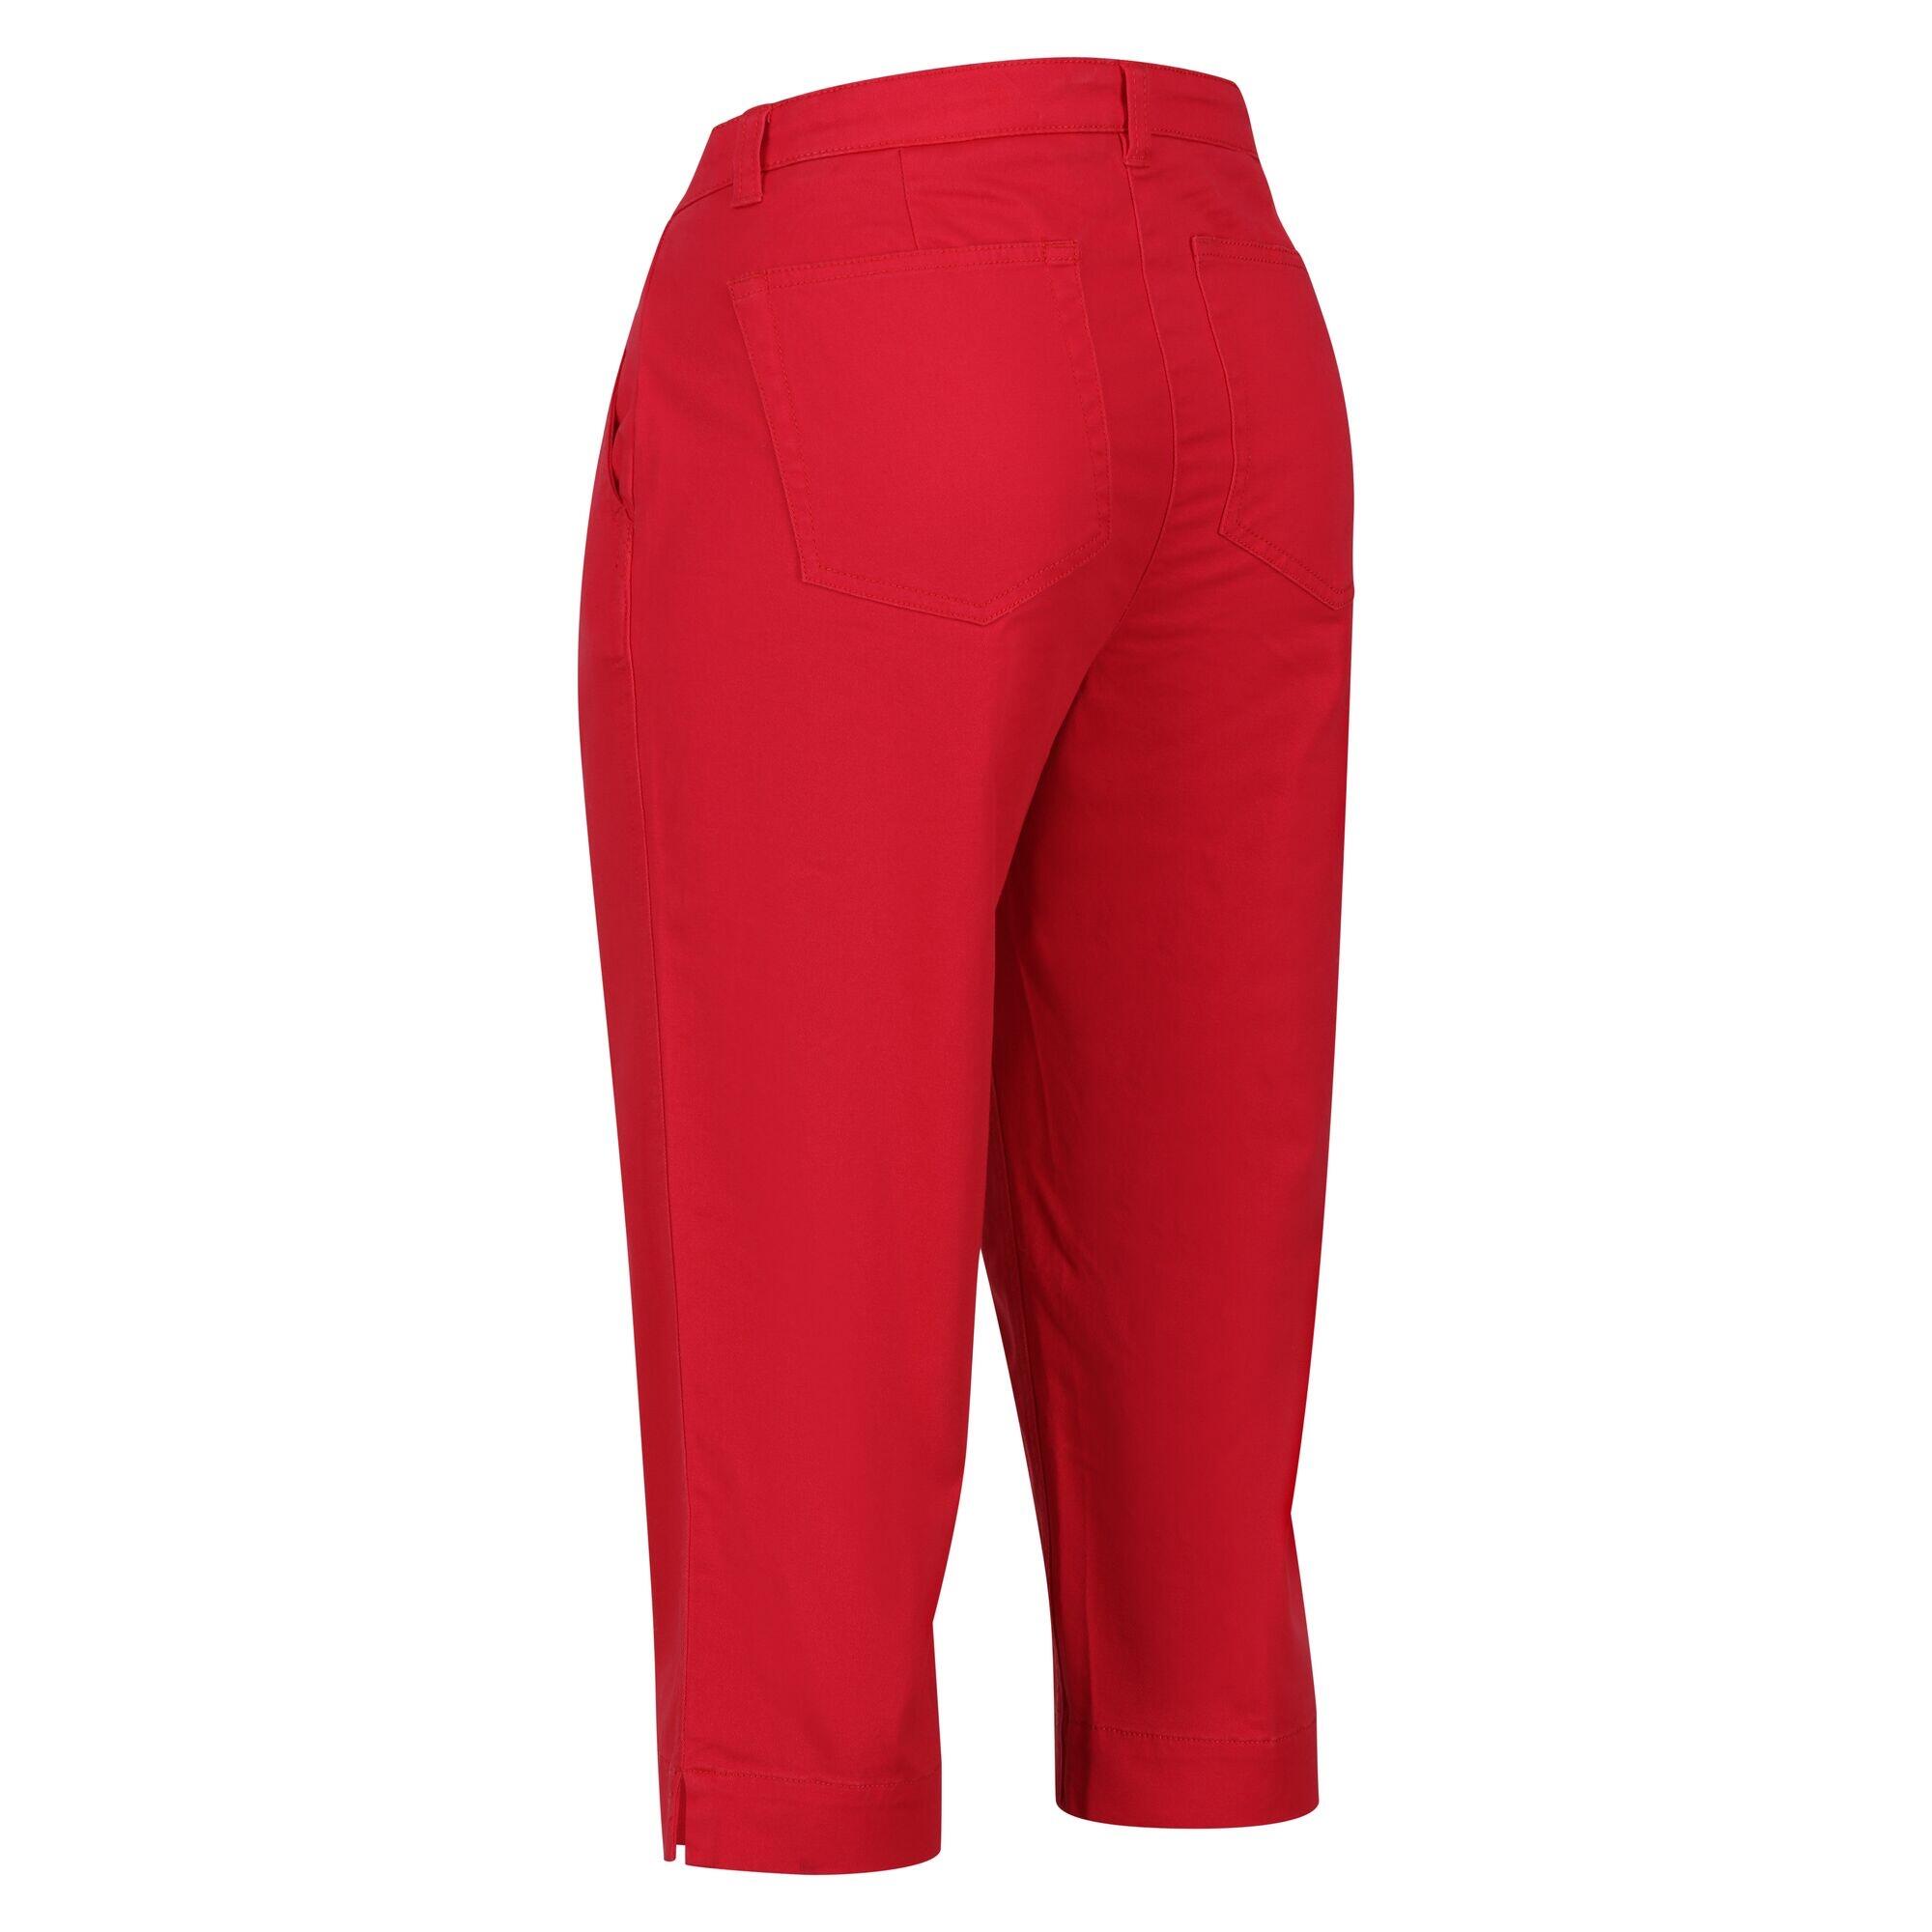 Womens/Ladies Bayla Cropped Trousers (Miami Red) 4/5